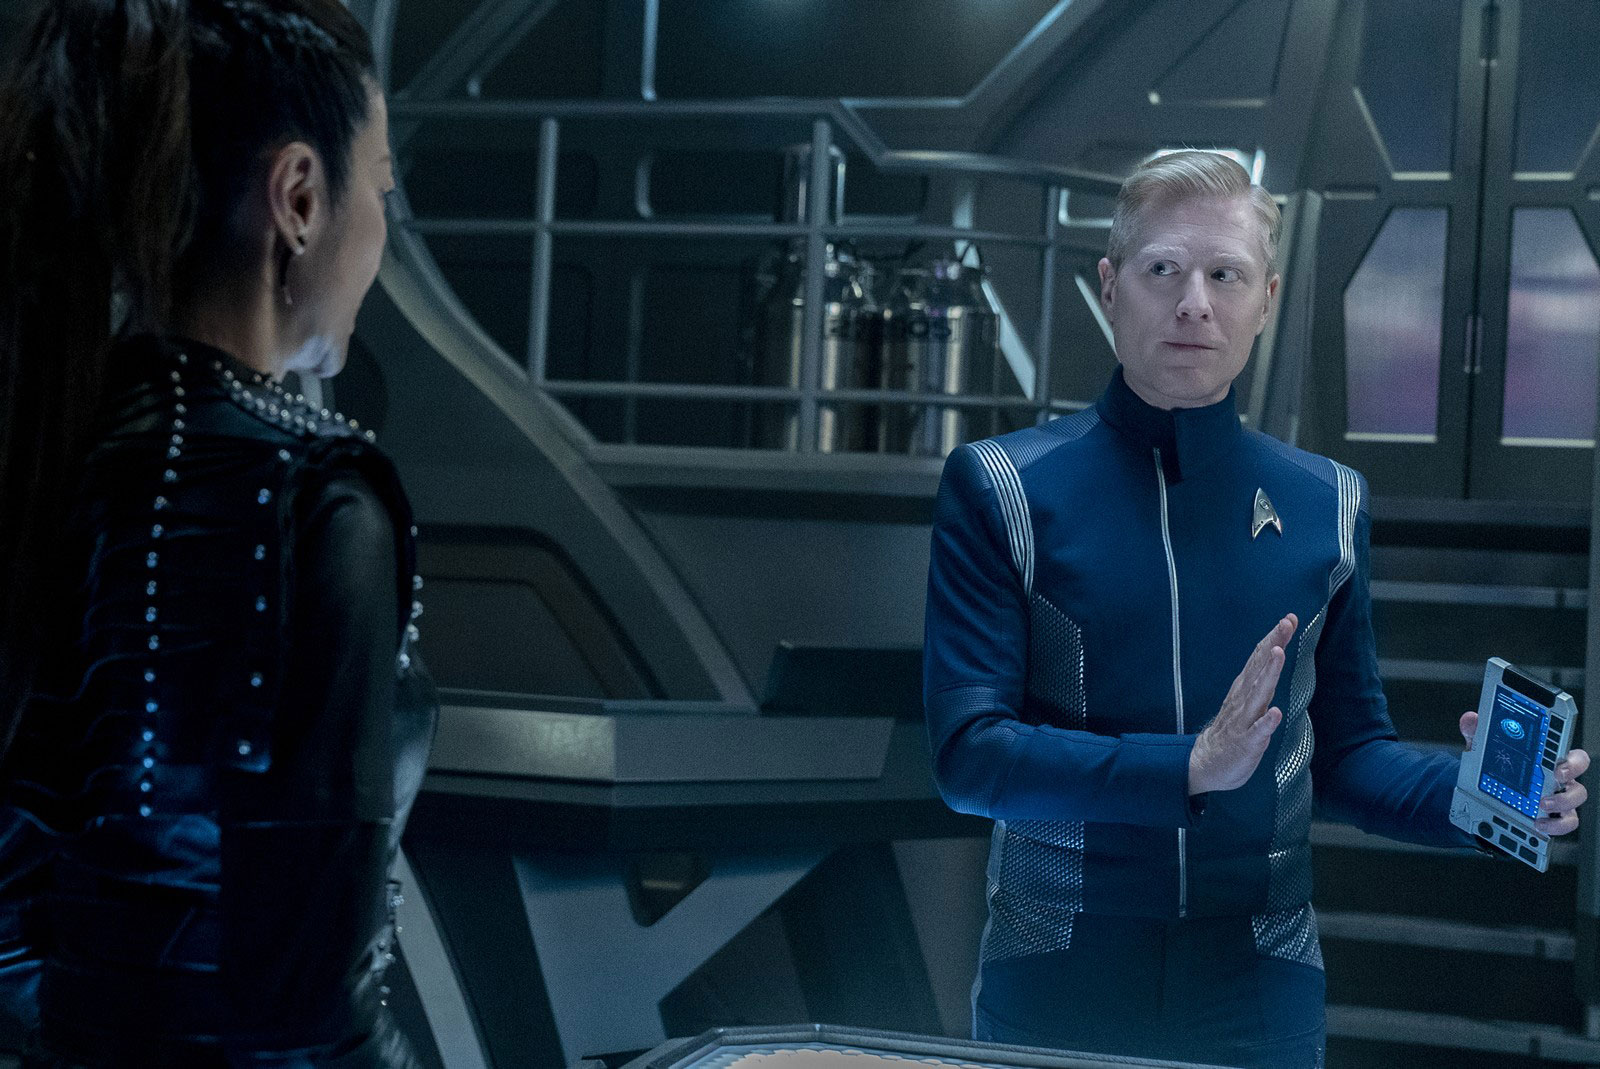 Michelle Yeoh as Philippa Georgiou and Anthony Rapp as Paul Stamets